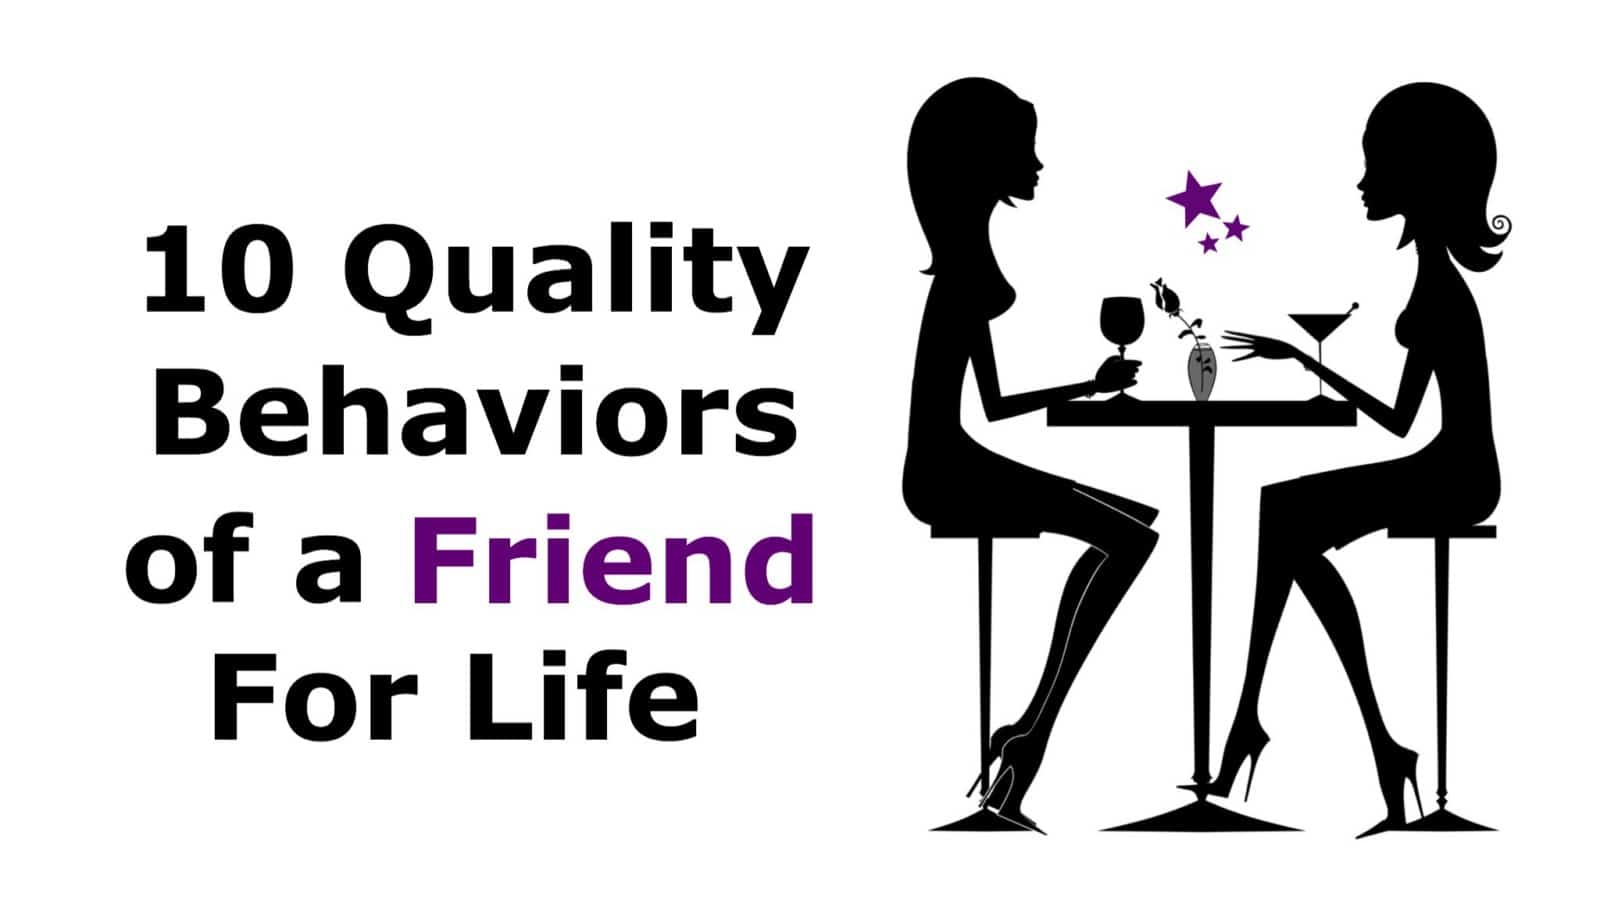 10 Quality Behaviors of A Friend For Life